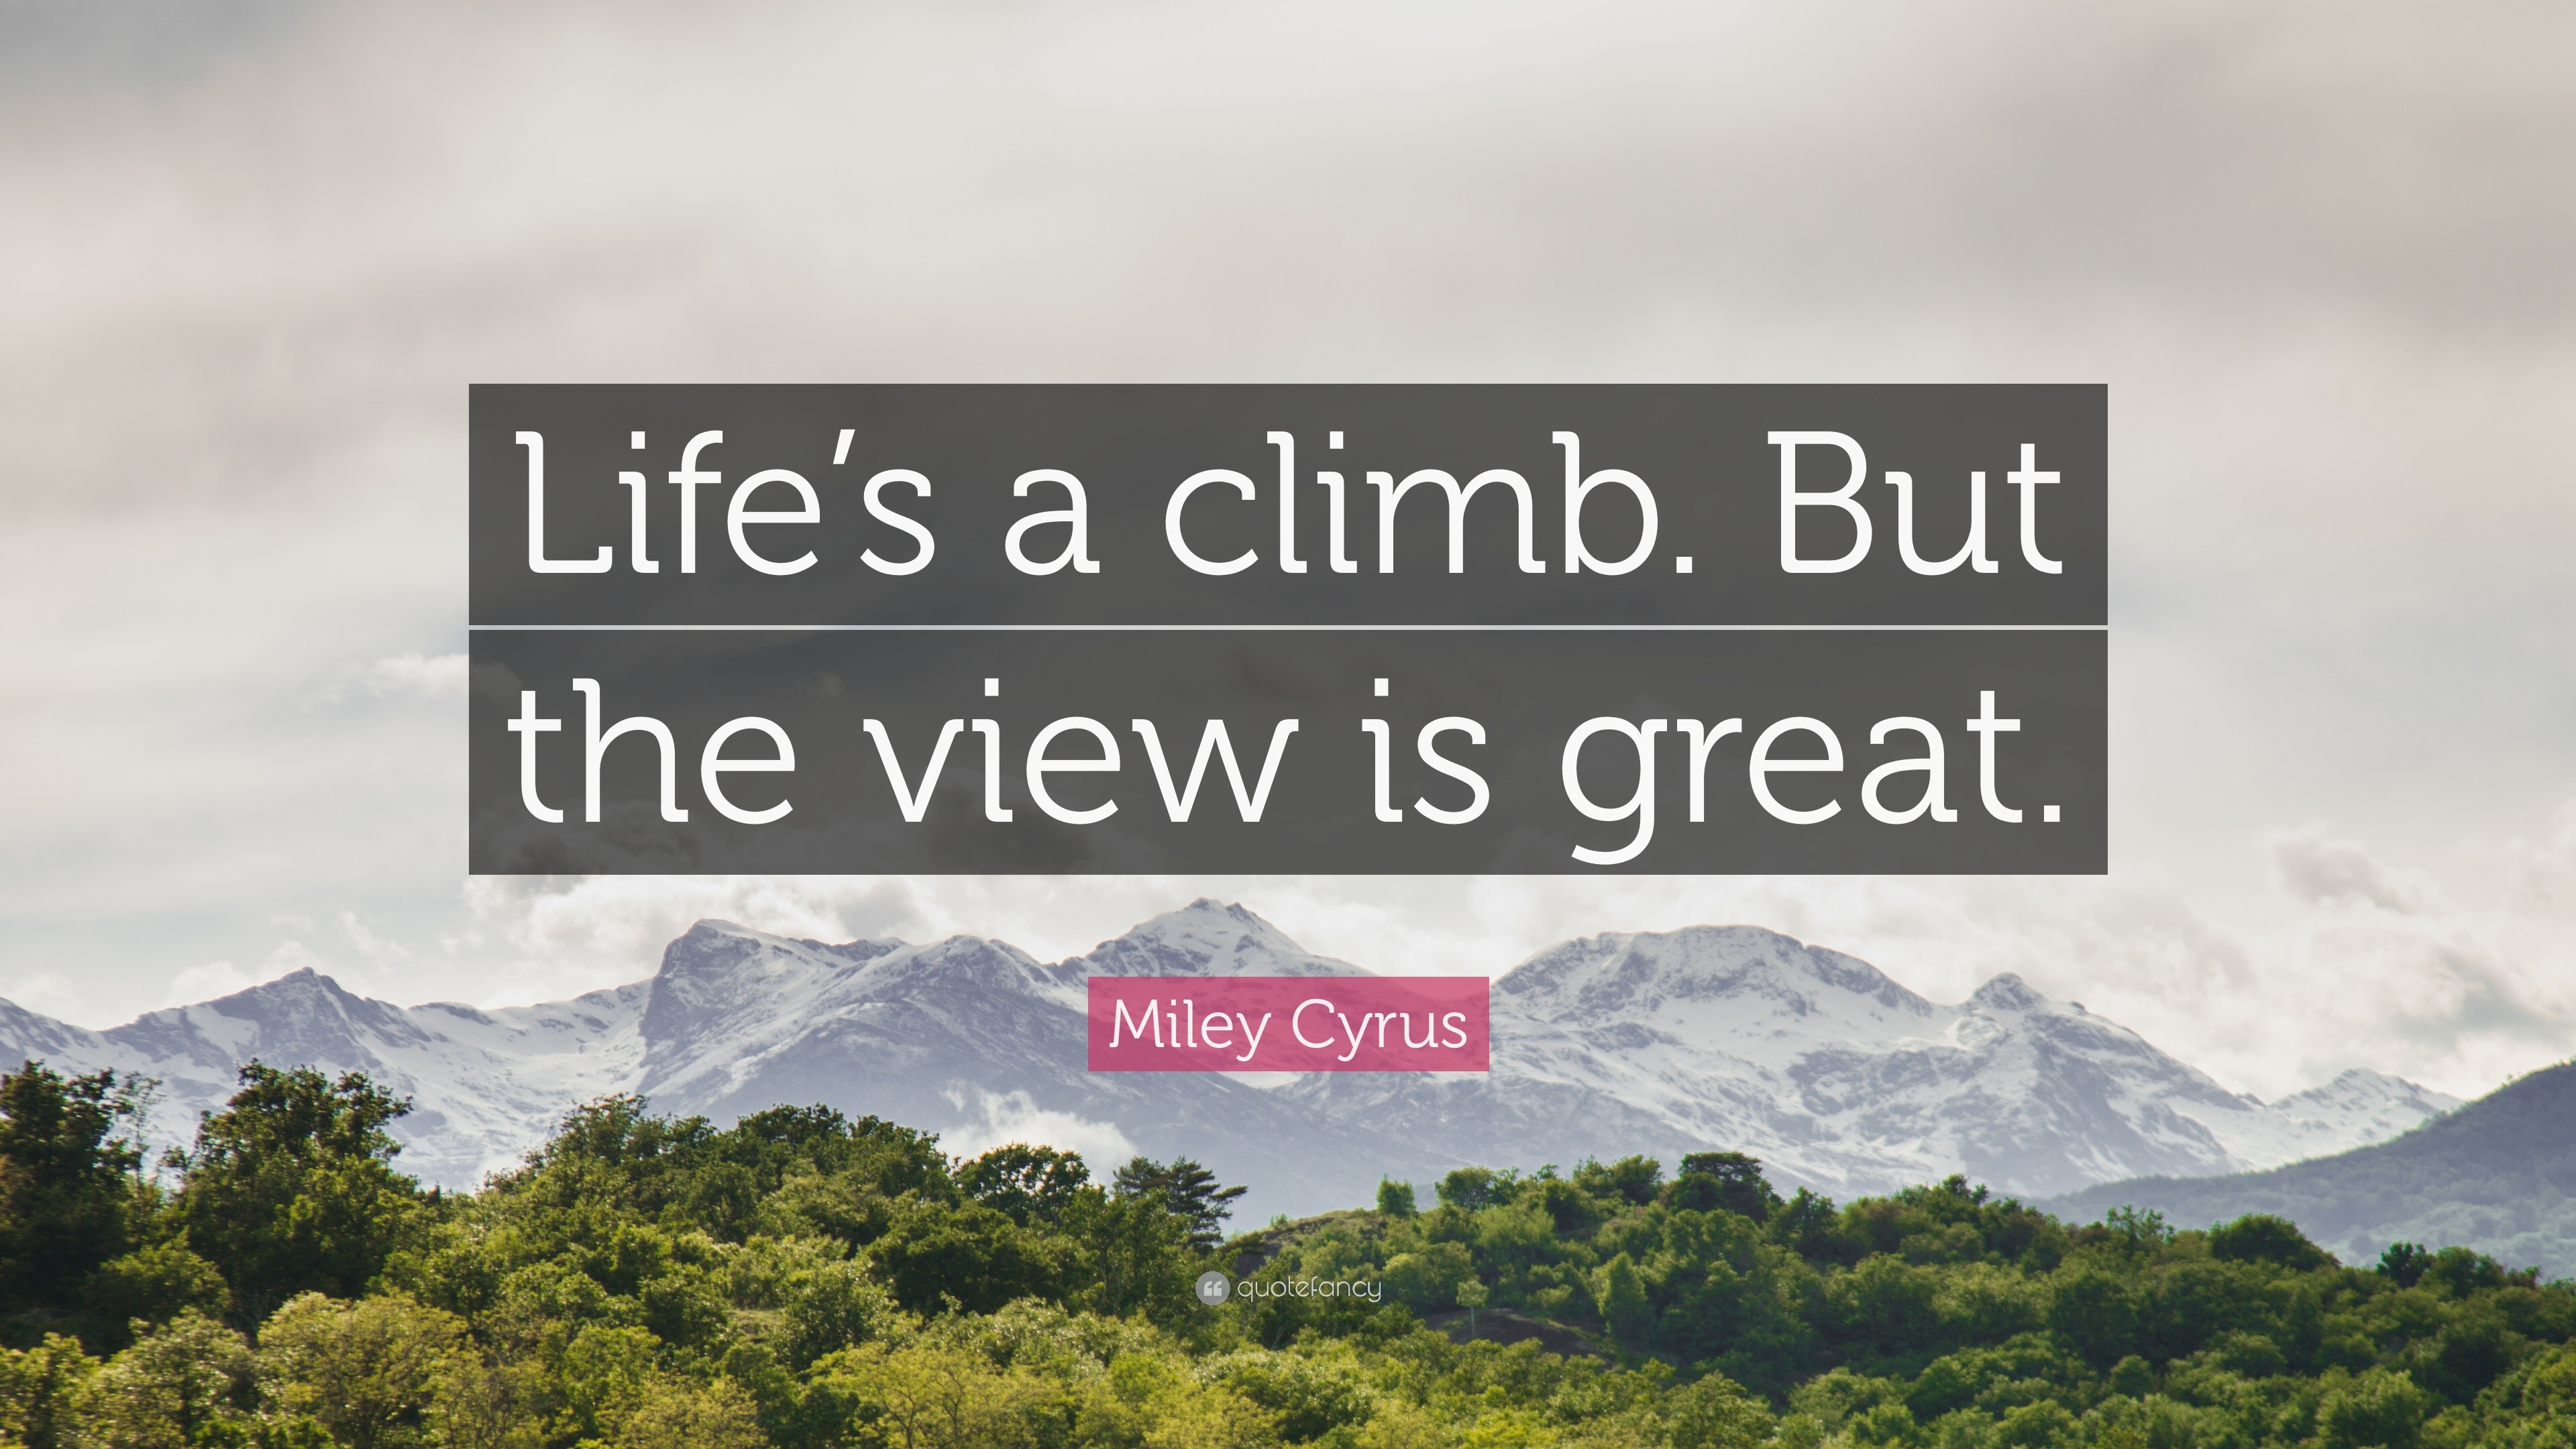 Lifes A Climb Quotes, Quotations & Sayings 2018